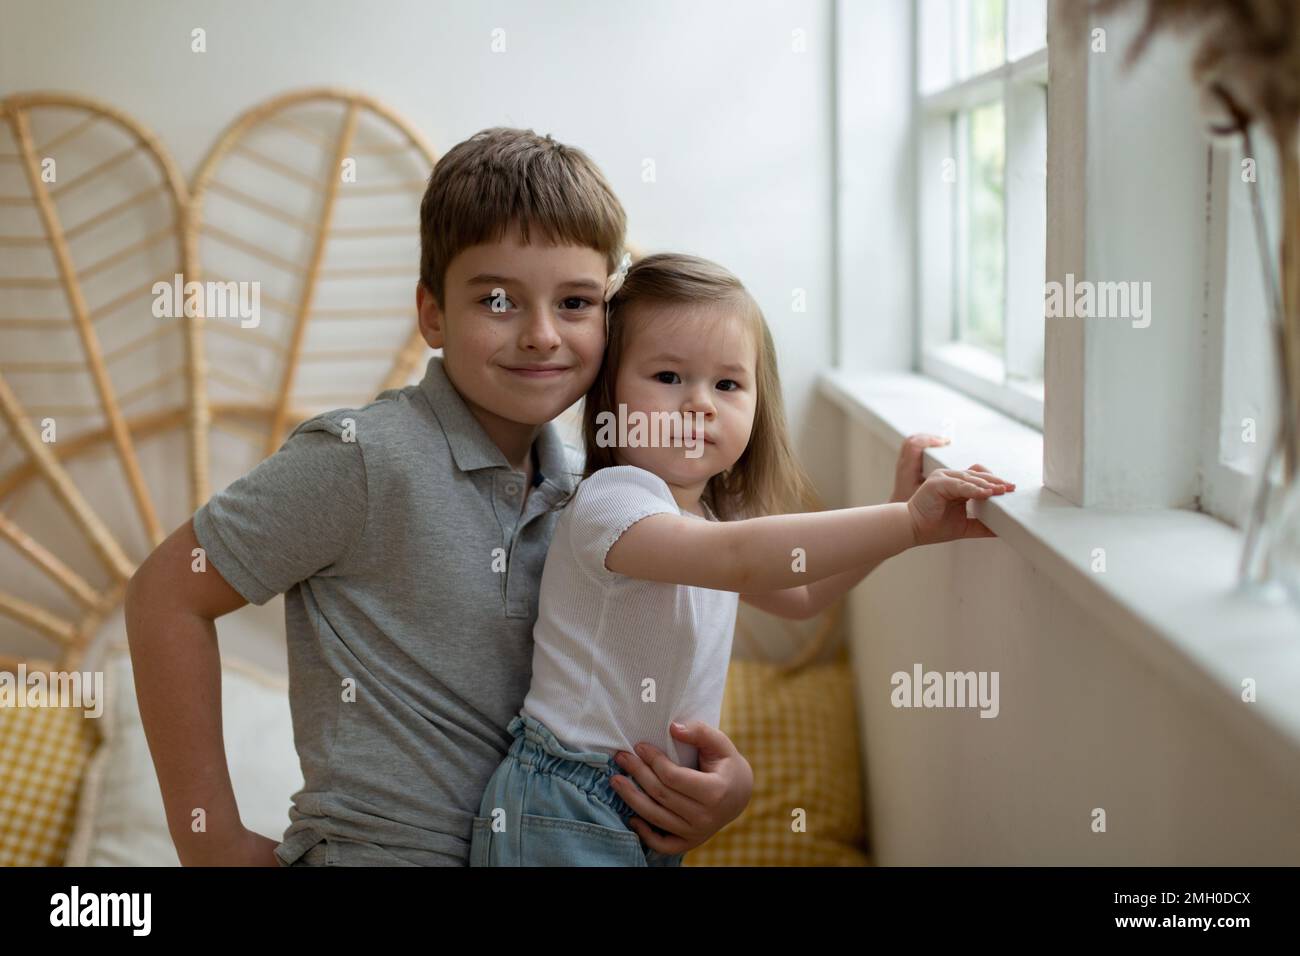 Big brother schoolboy hugs his little sister Stock Photo